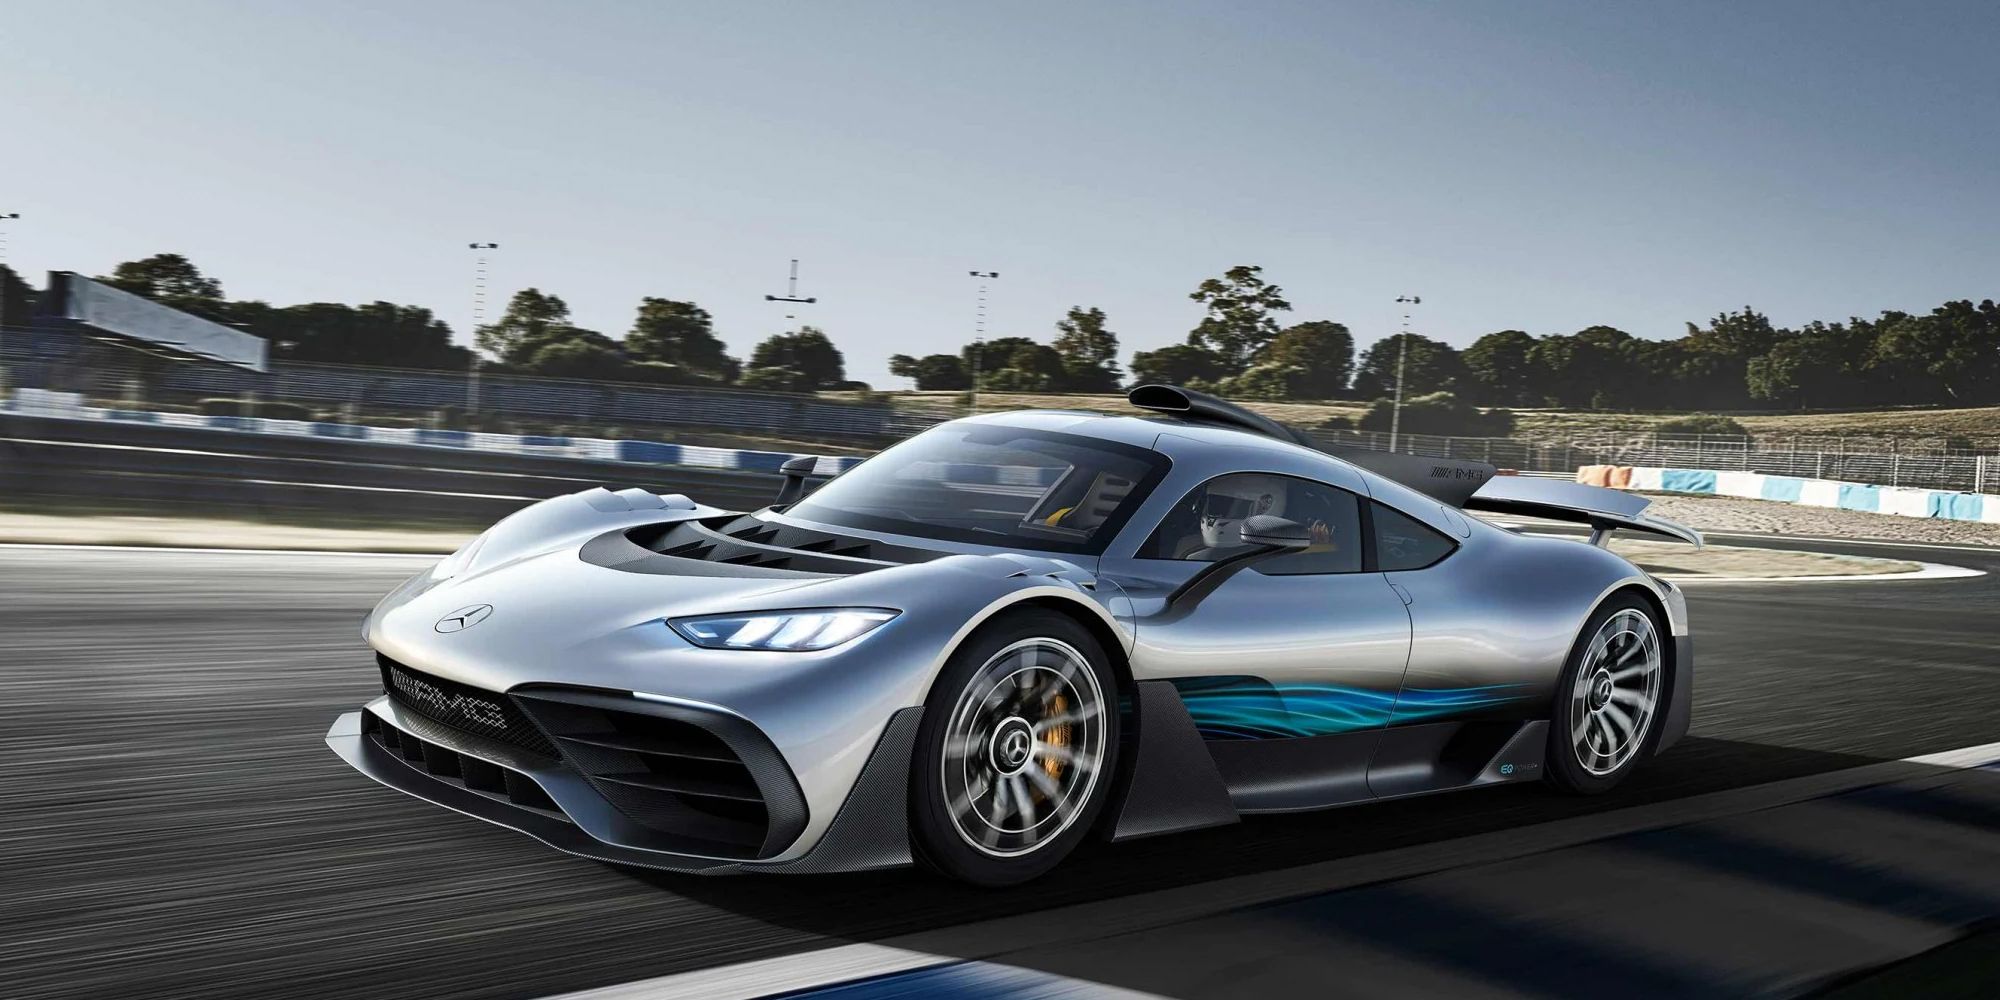 The AMG One on the track